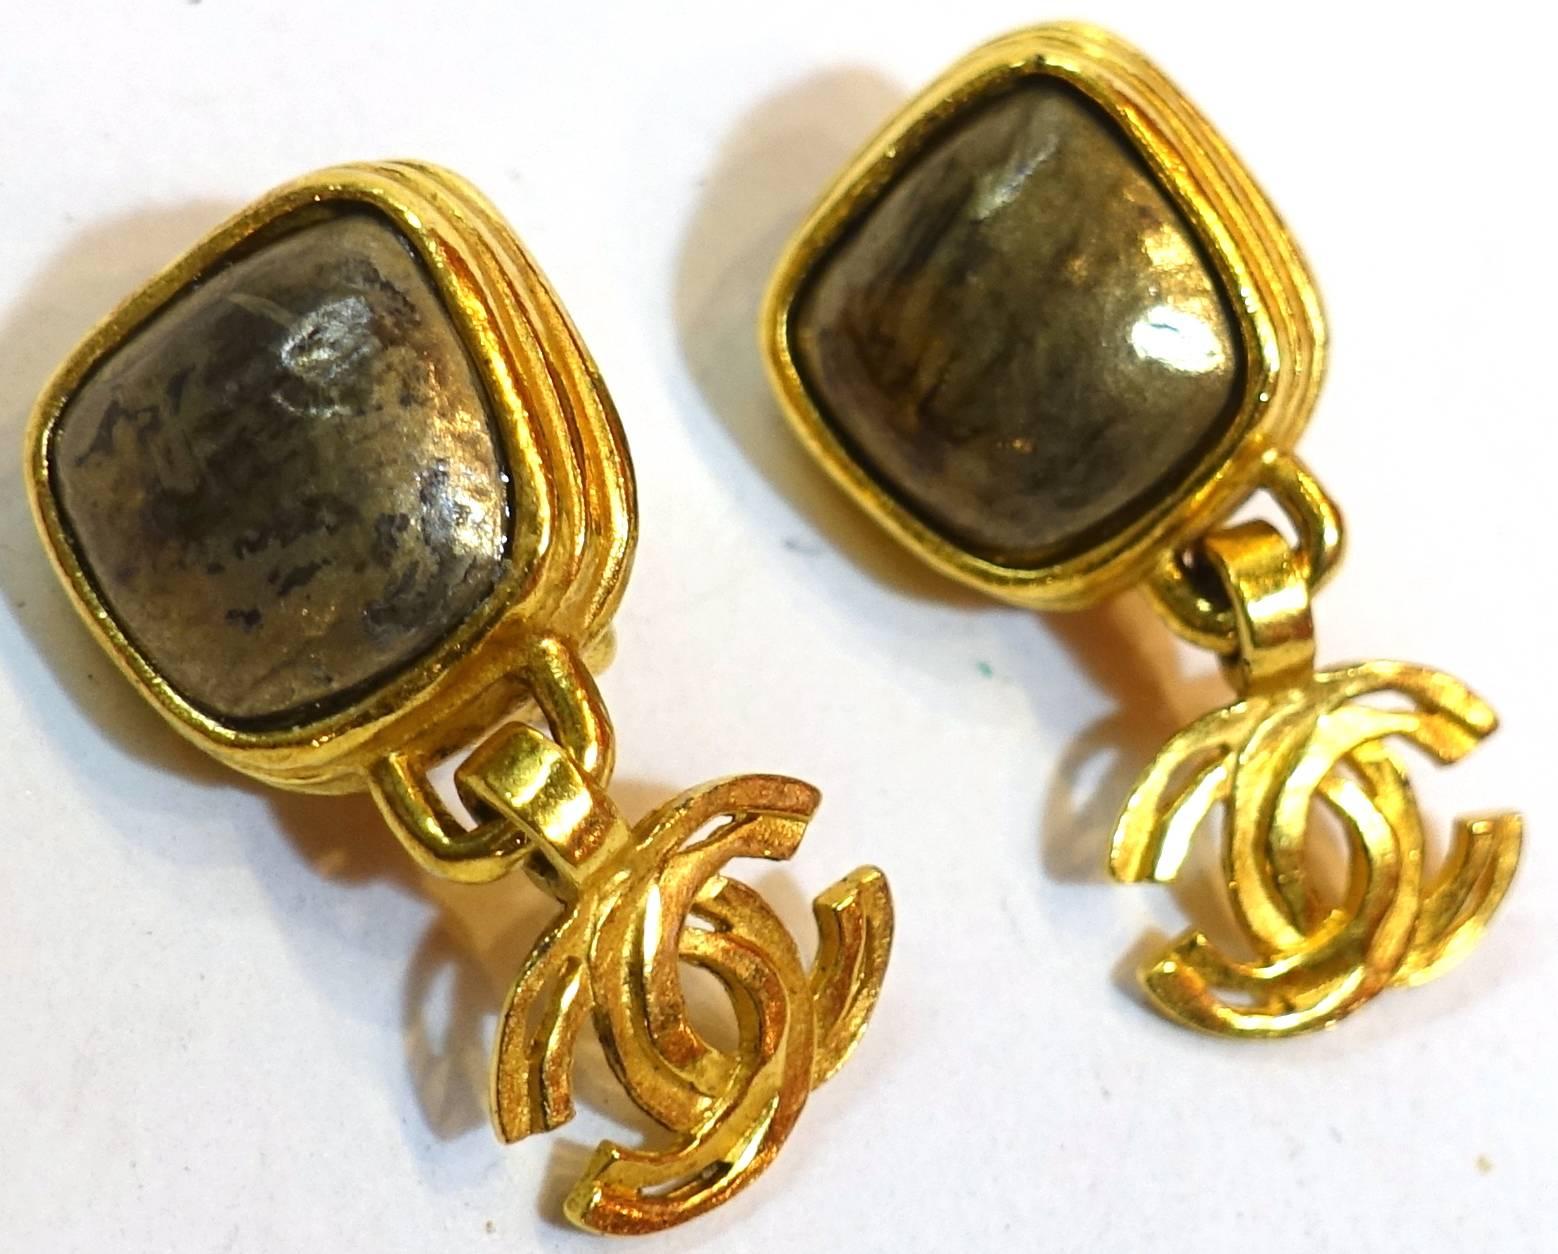 These vintage Chanel clip earrings are very unusual and I believe rare.  The top has a grey iridescent stone bezel in a gold tone ribbed frame.  The double Cs extends down from the frame. They measure 1-1/2” long and 3/4